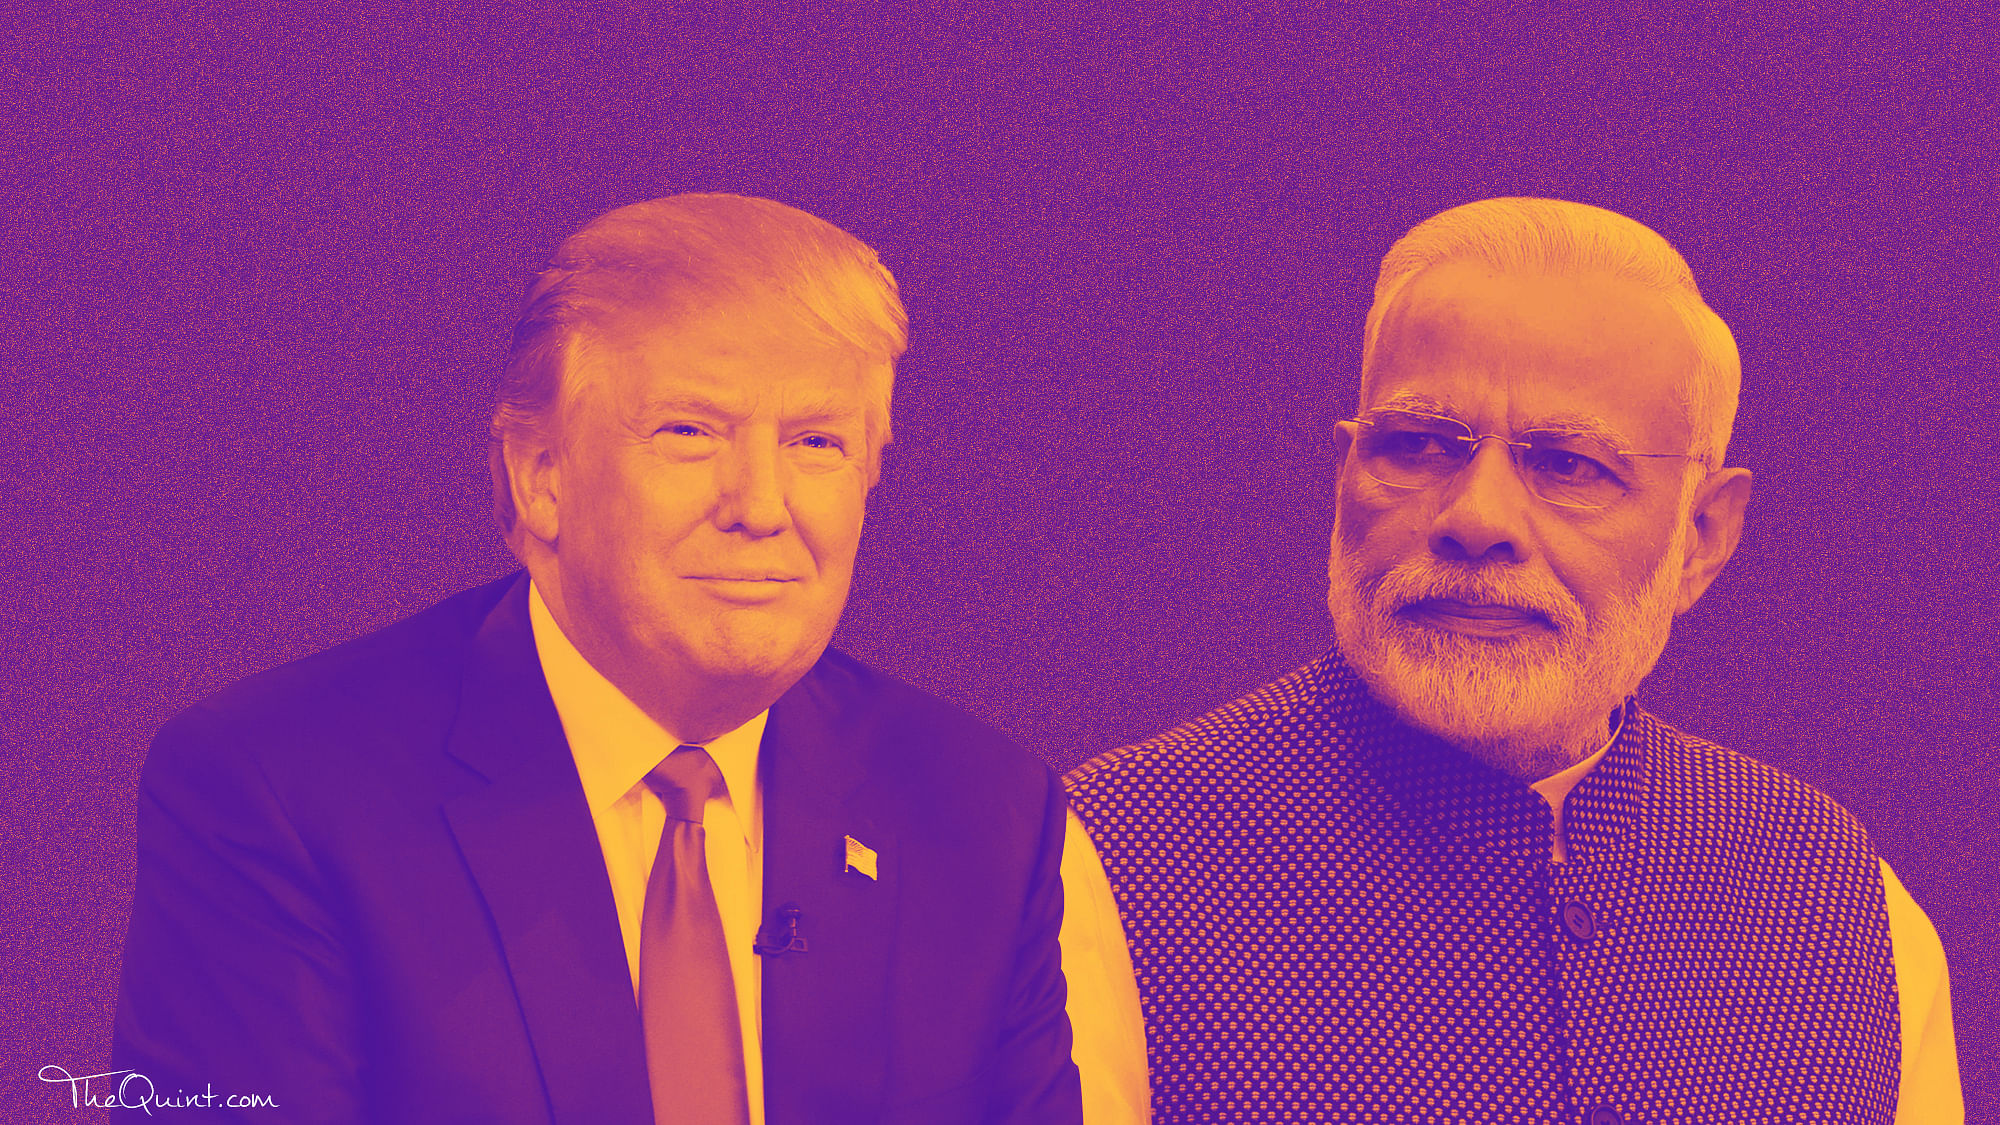  Narendra Modi and Donald Trump are set to meet in Washington DC on 26 June.